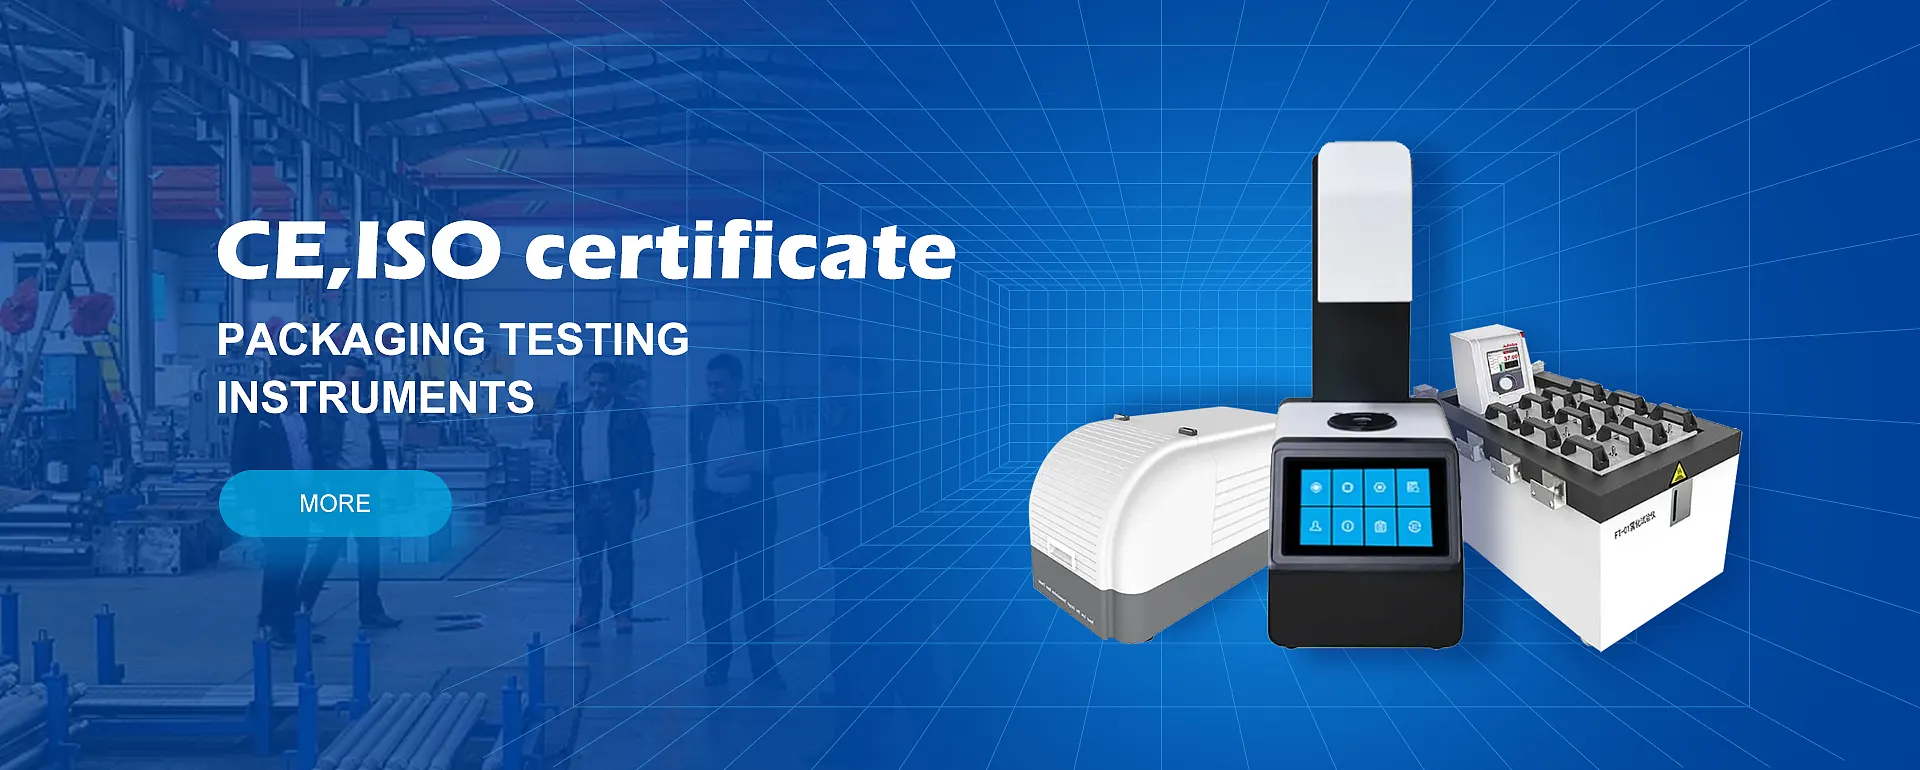 CE ISO certificate packaging testing equipment